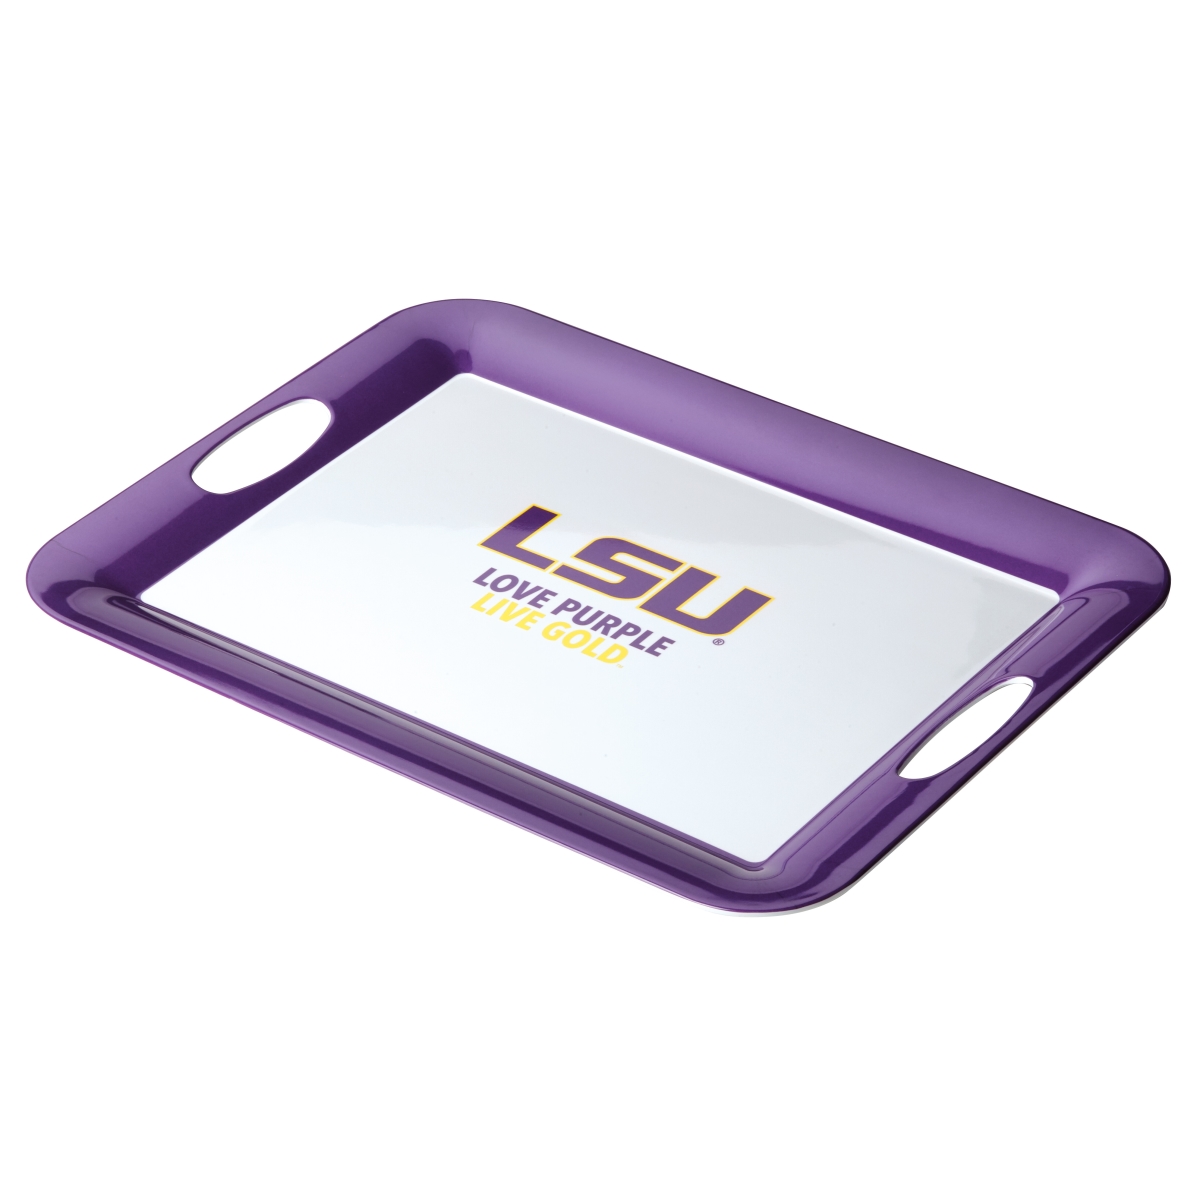 47635 Louisiana State University Serving Score Party Platter, 16 X 12.5 In. - White